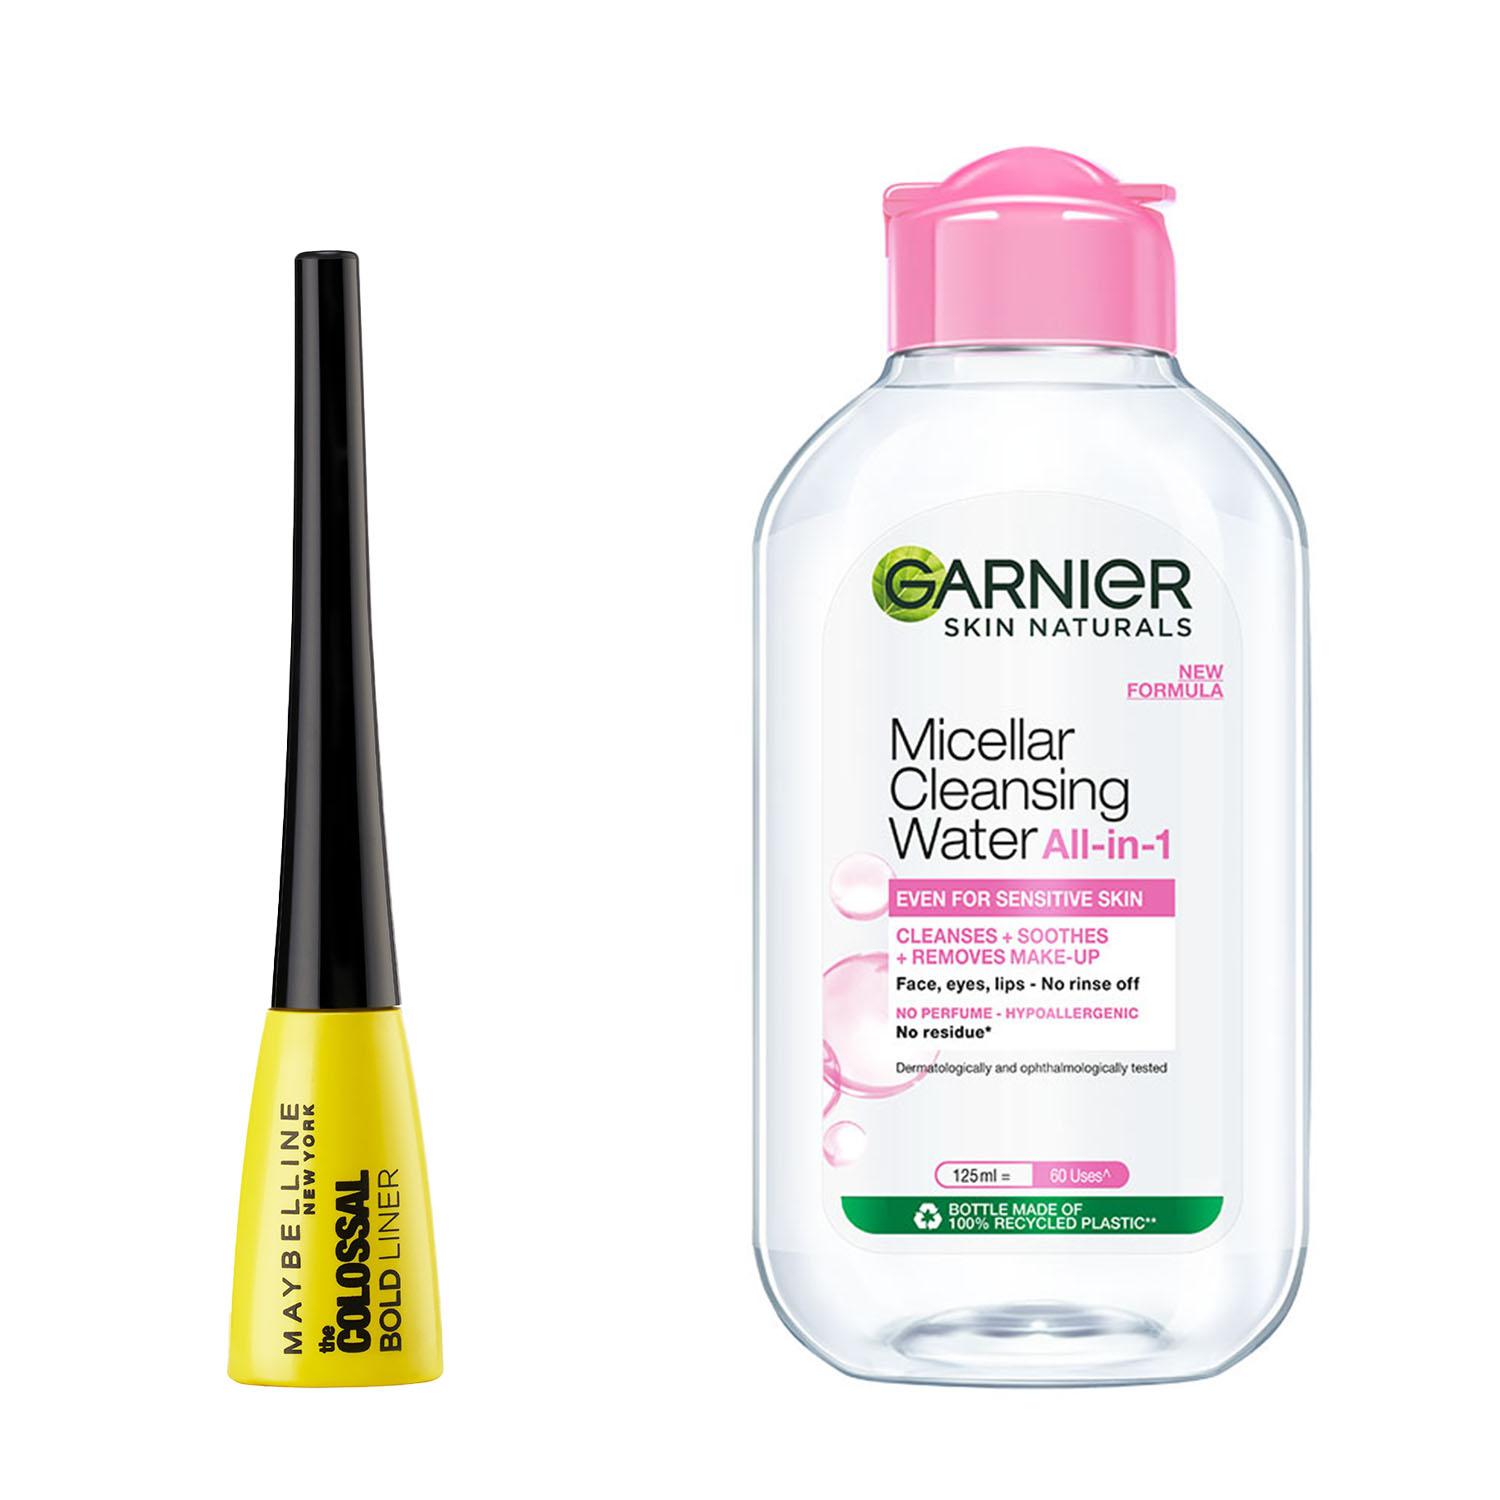 Maybelline New York | Maybelline New York Colossal Bold Eyeliner, Black, with Garnier Micellar Cleansing Water Combo